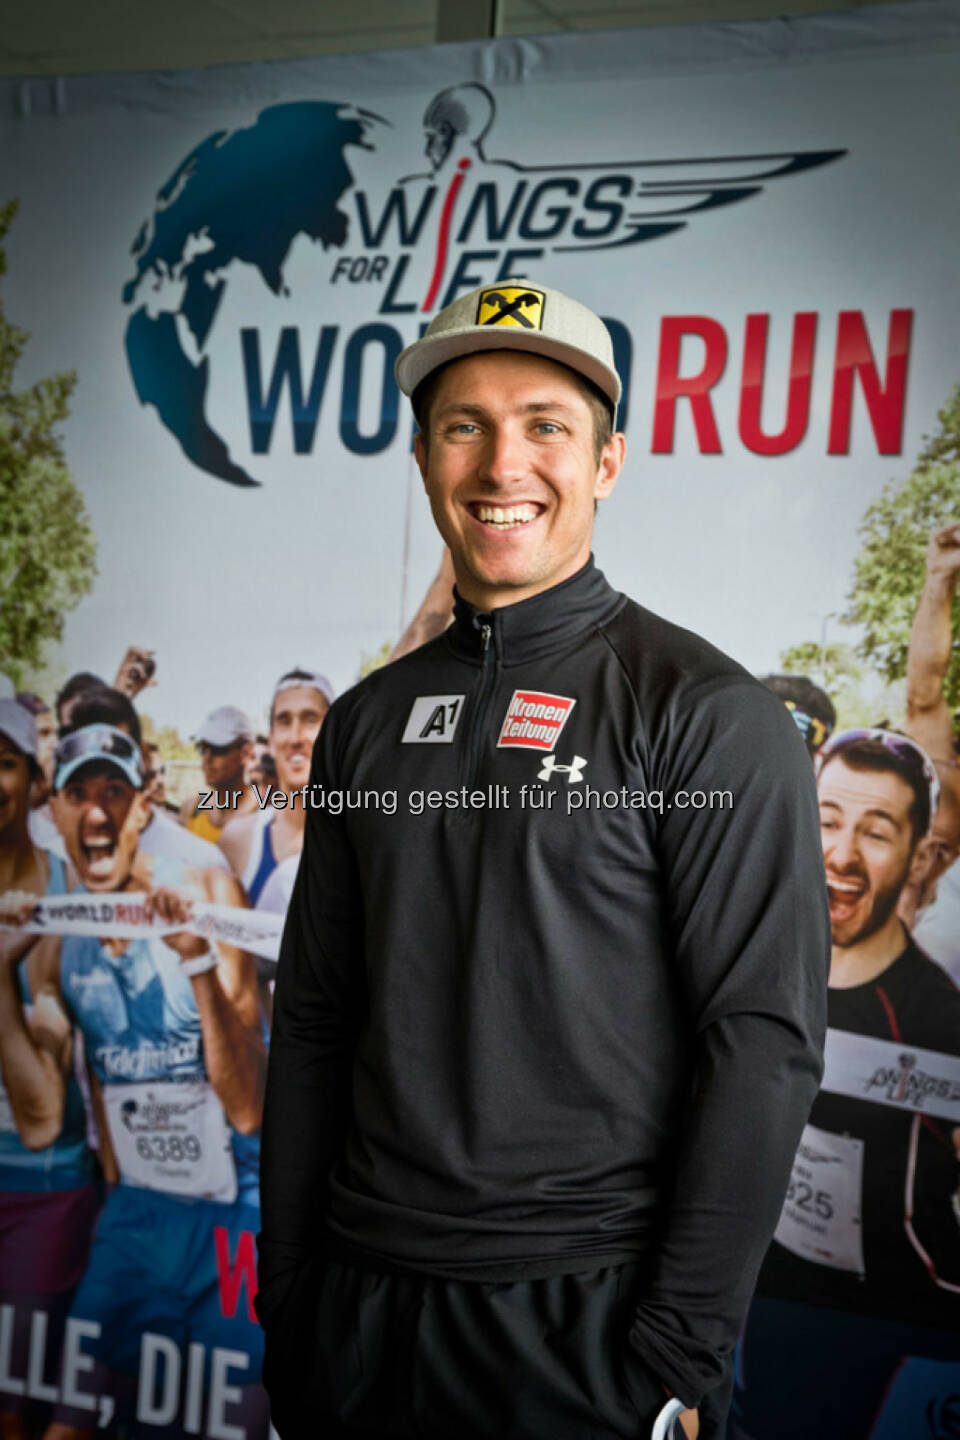 Marcel Hirscher poses for a portrait before the start at Wings for Life World Run in St. Poelten, Austria on May, 3rd 2015. // Mirja Geh for Wings for Life World Run // Please go to www.redbullcontentpool.com for further information. // 